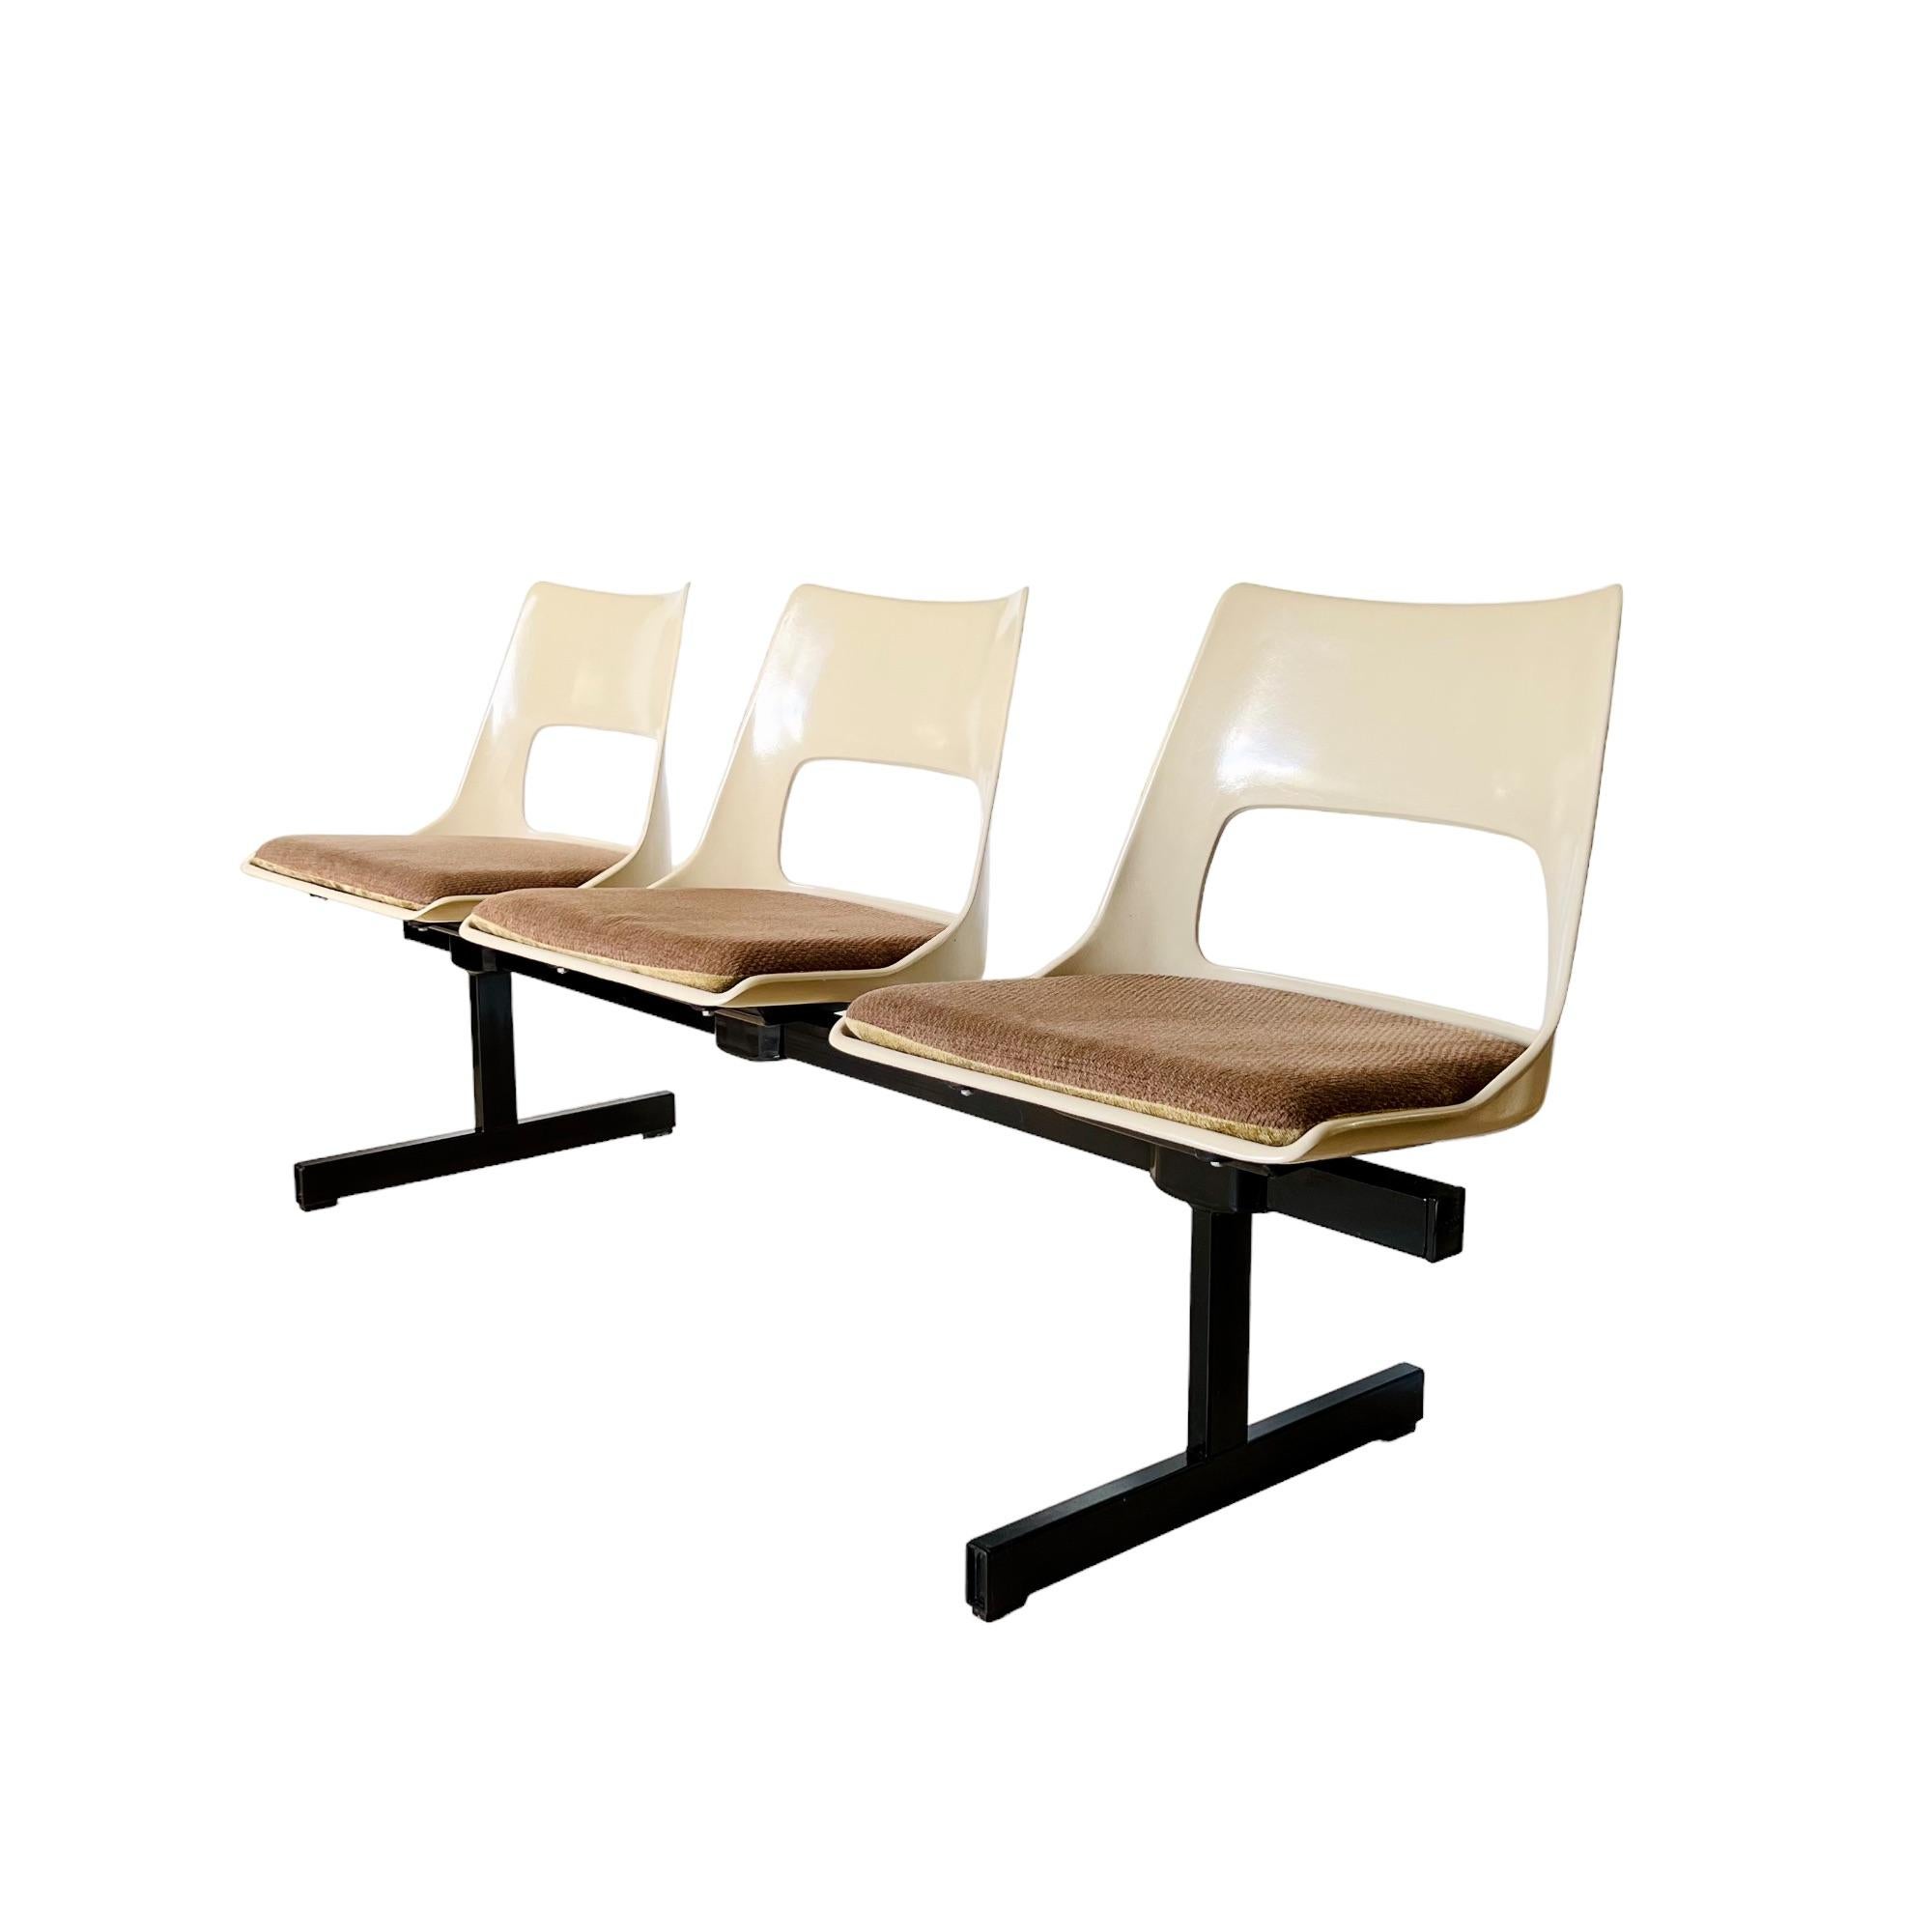 Vintage mid-century modern tandem beam seating by Krueger International circa 1970. This bench features three molded fiberglass light beige color shells connected on a black metal stretcher frame. The fiberglass seats are vented and slotted for